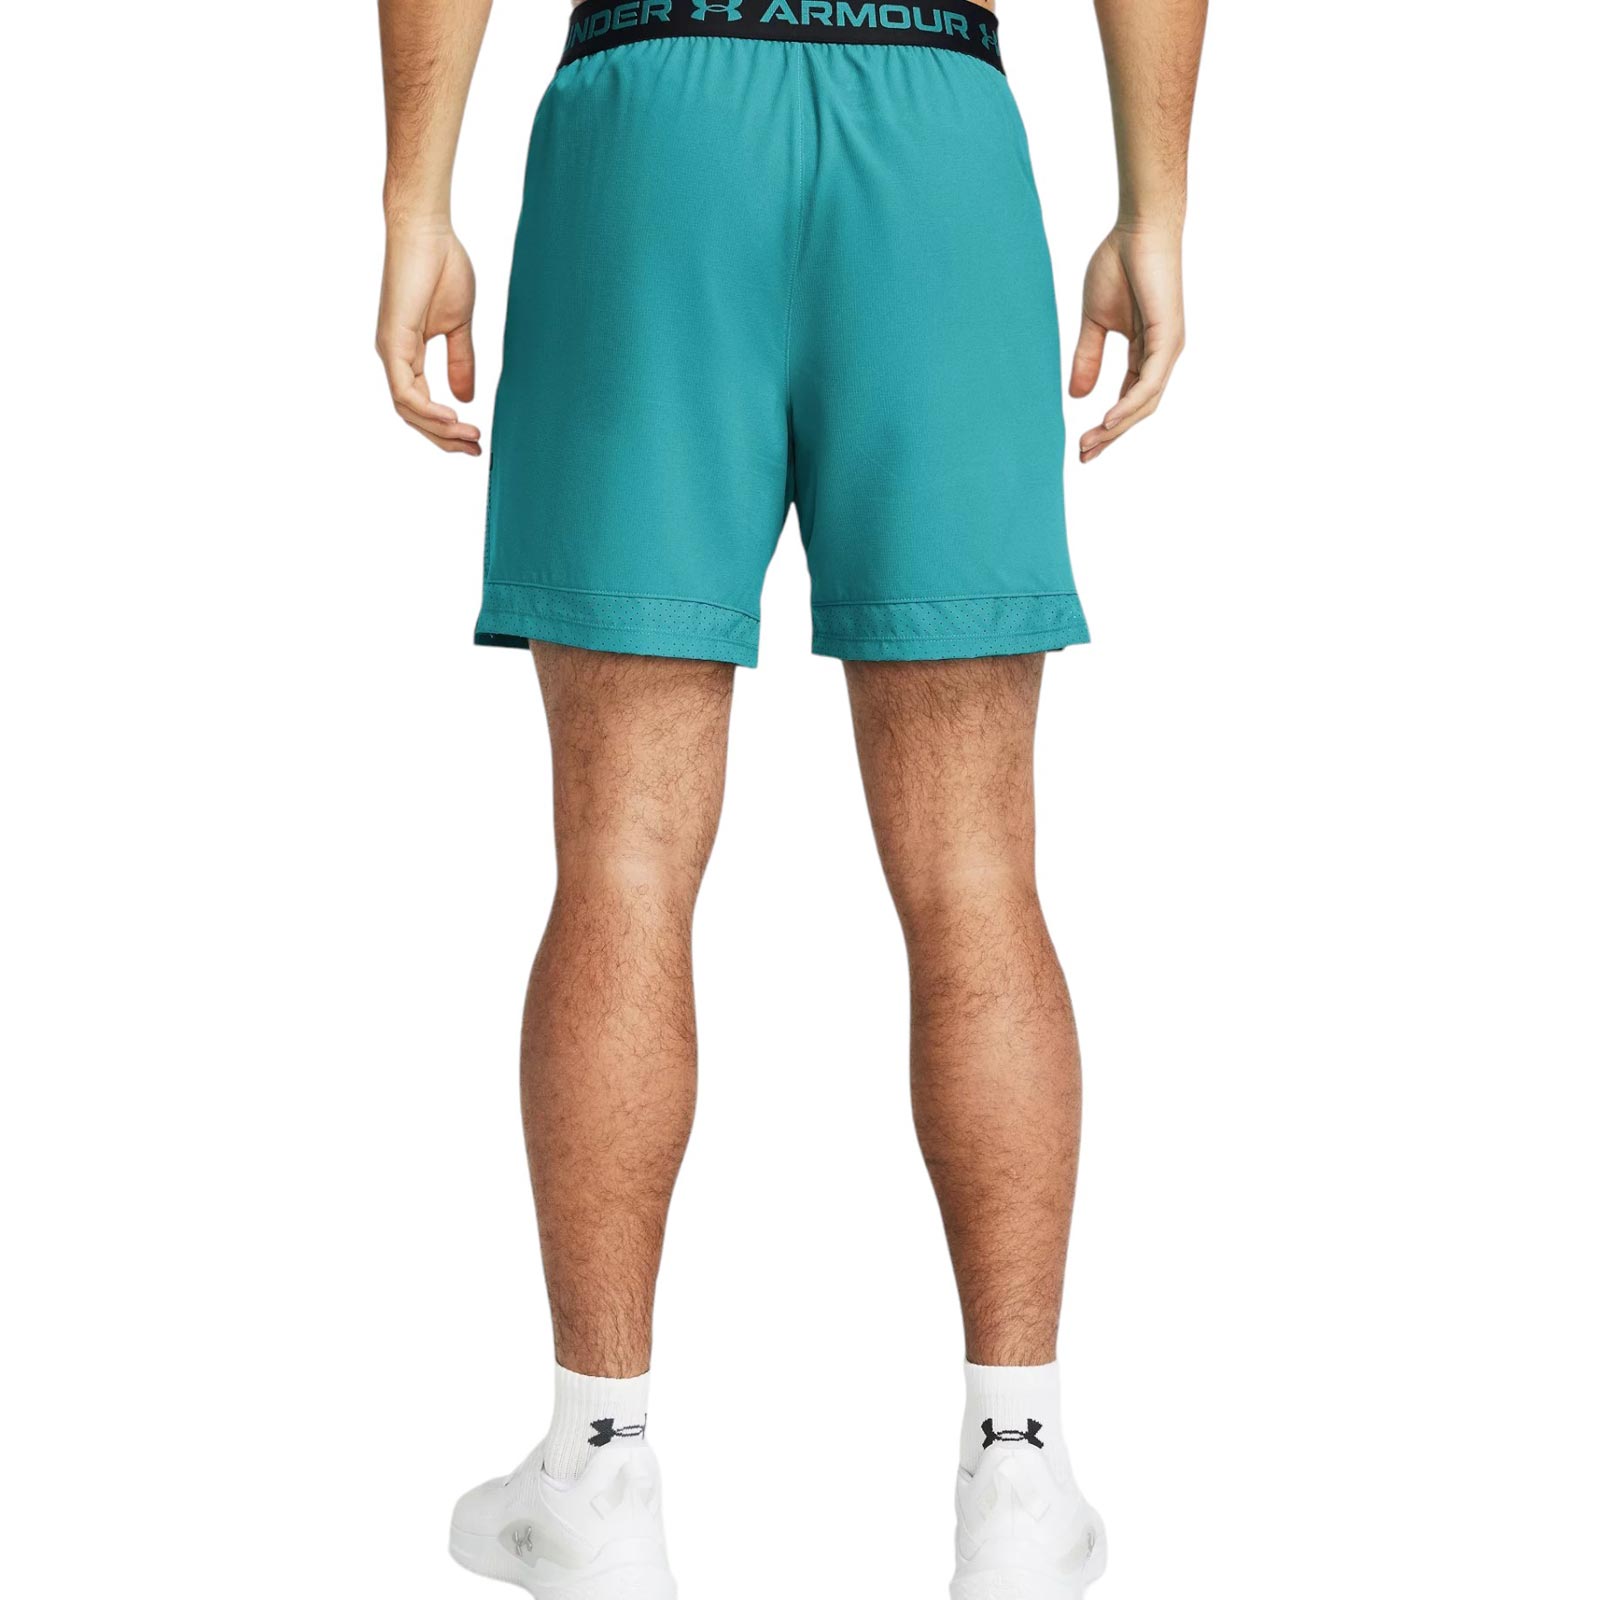 UNDER ARMOUR VANISH WOVEN 6-INCH MENS SHORTS